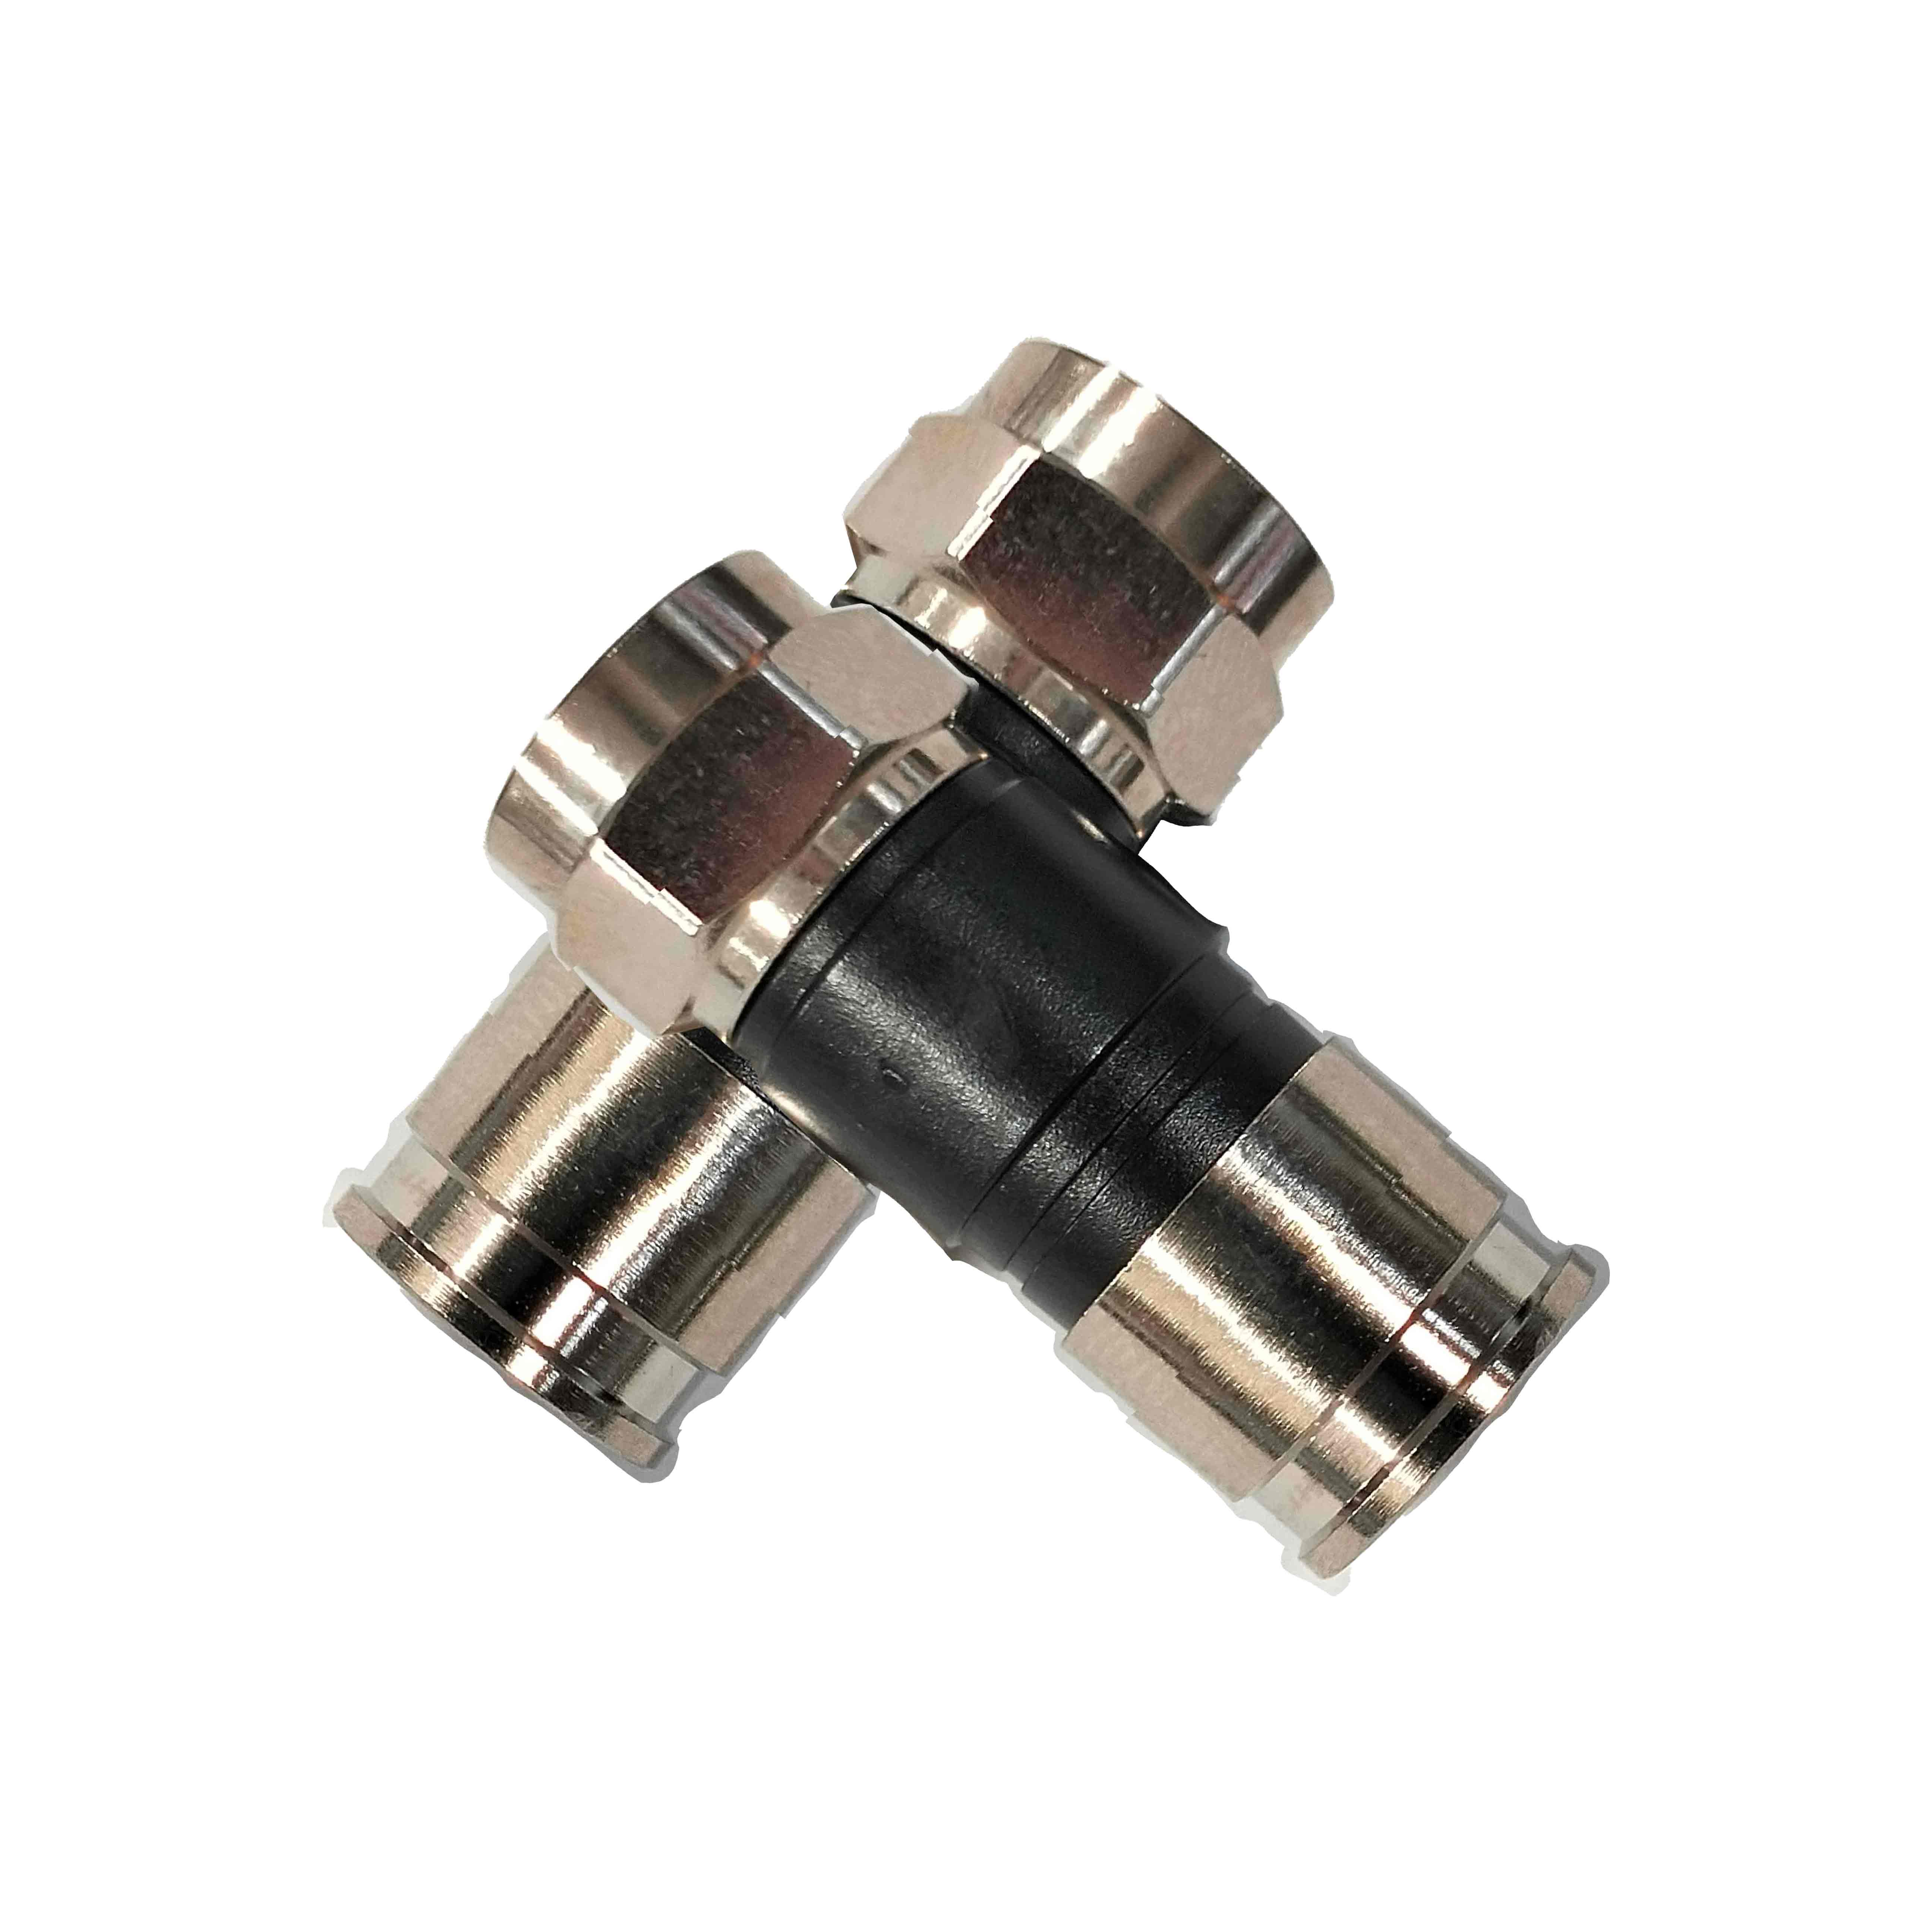 RG6 Universal Compression F Connector